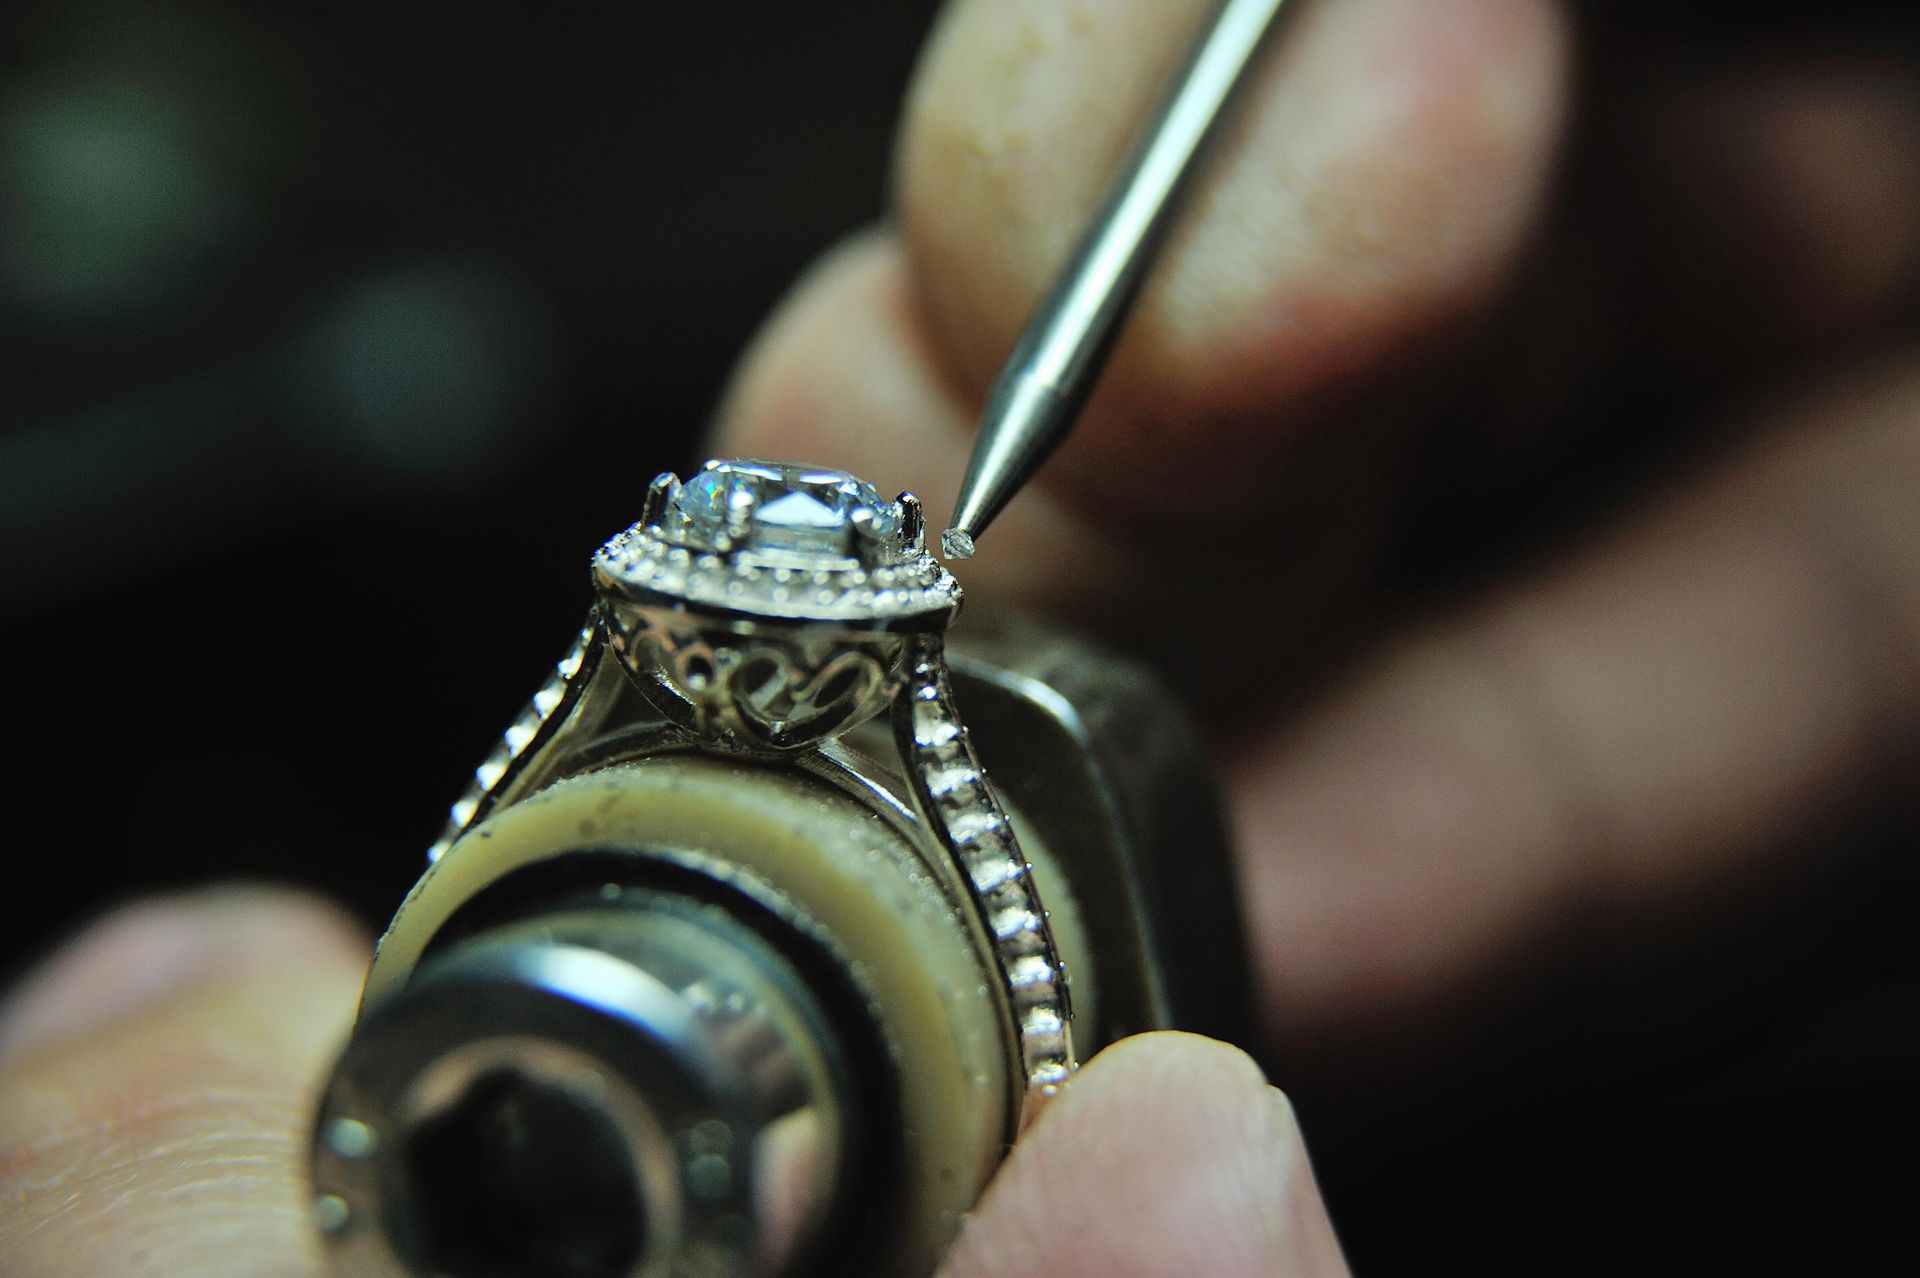 jewelry ring during manufacturing process